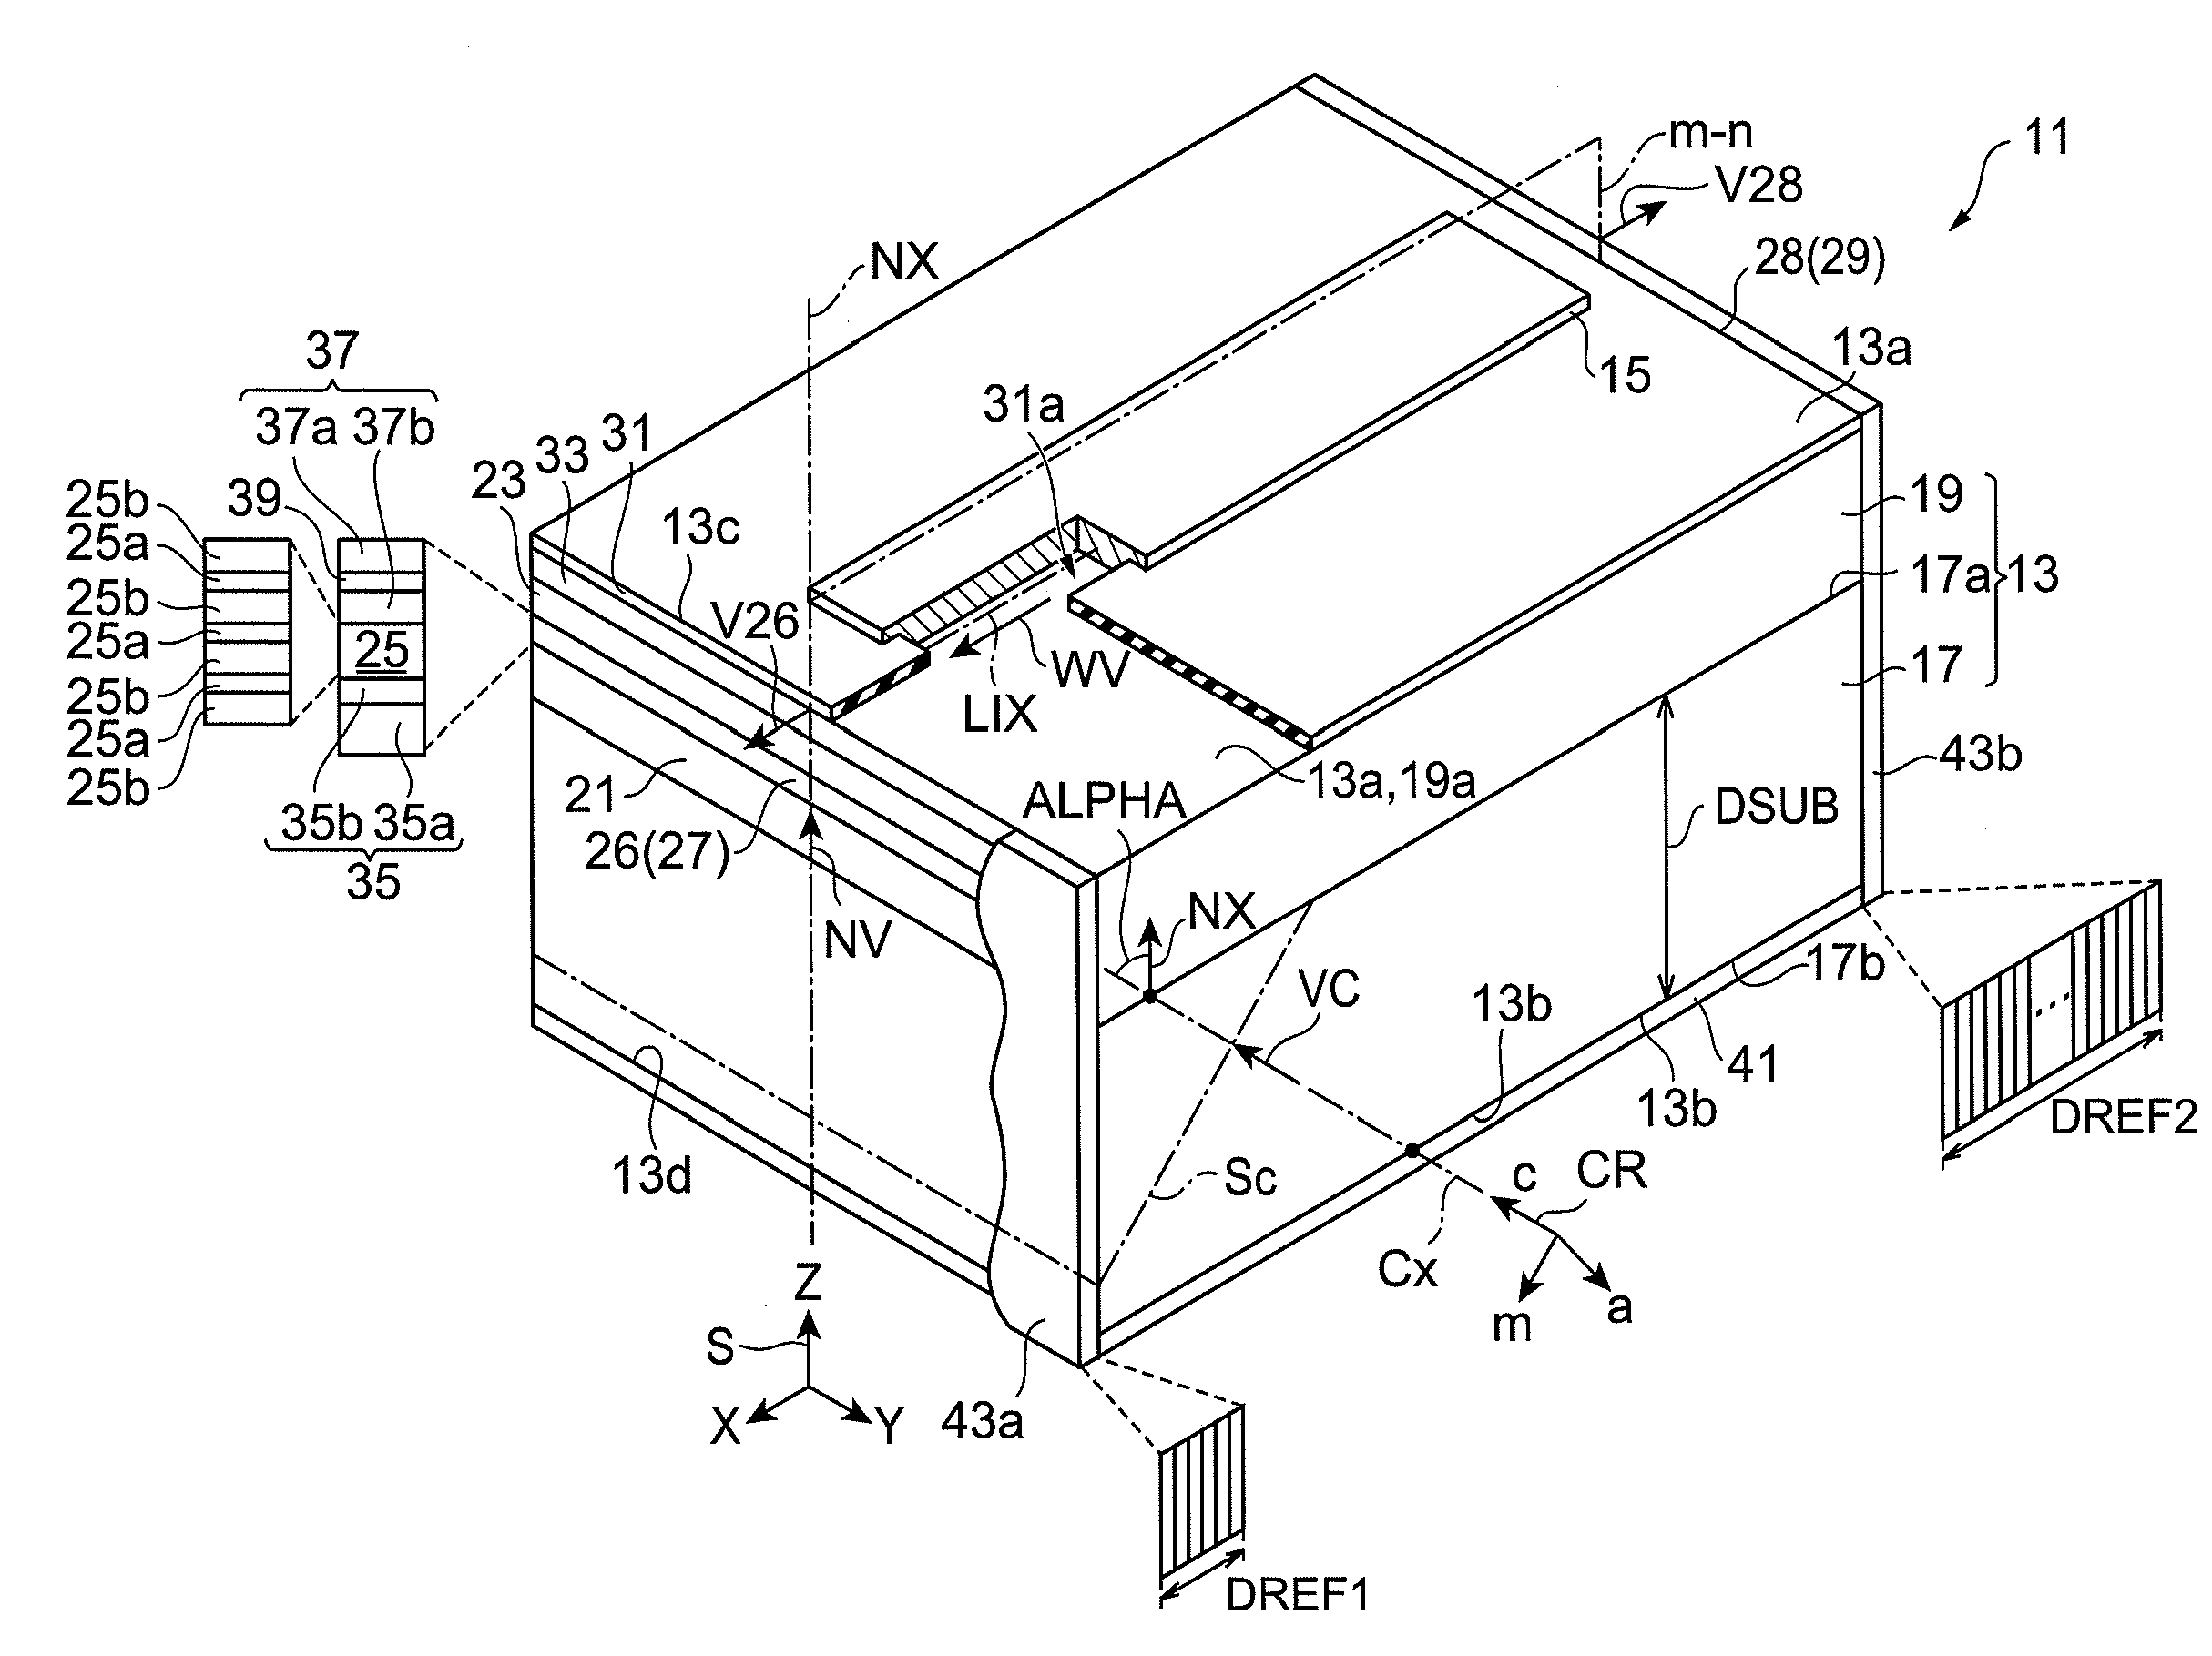 Iii-intride semiconductor laser device, and method of fabricating the iii-nitride semiconductor laser device